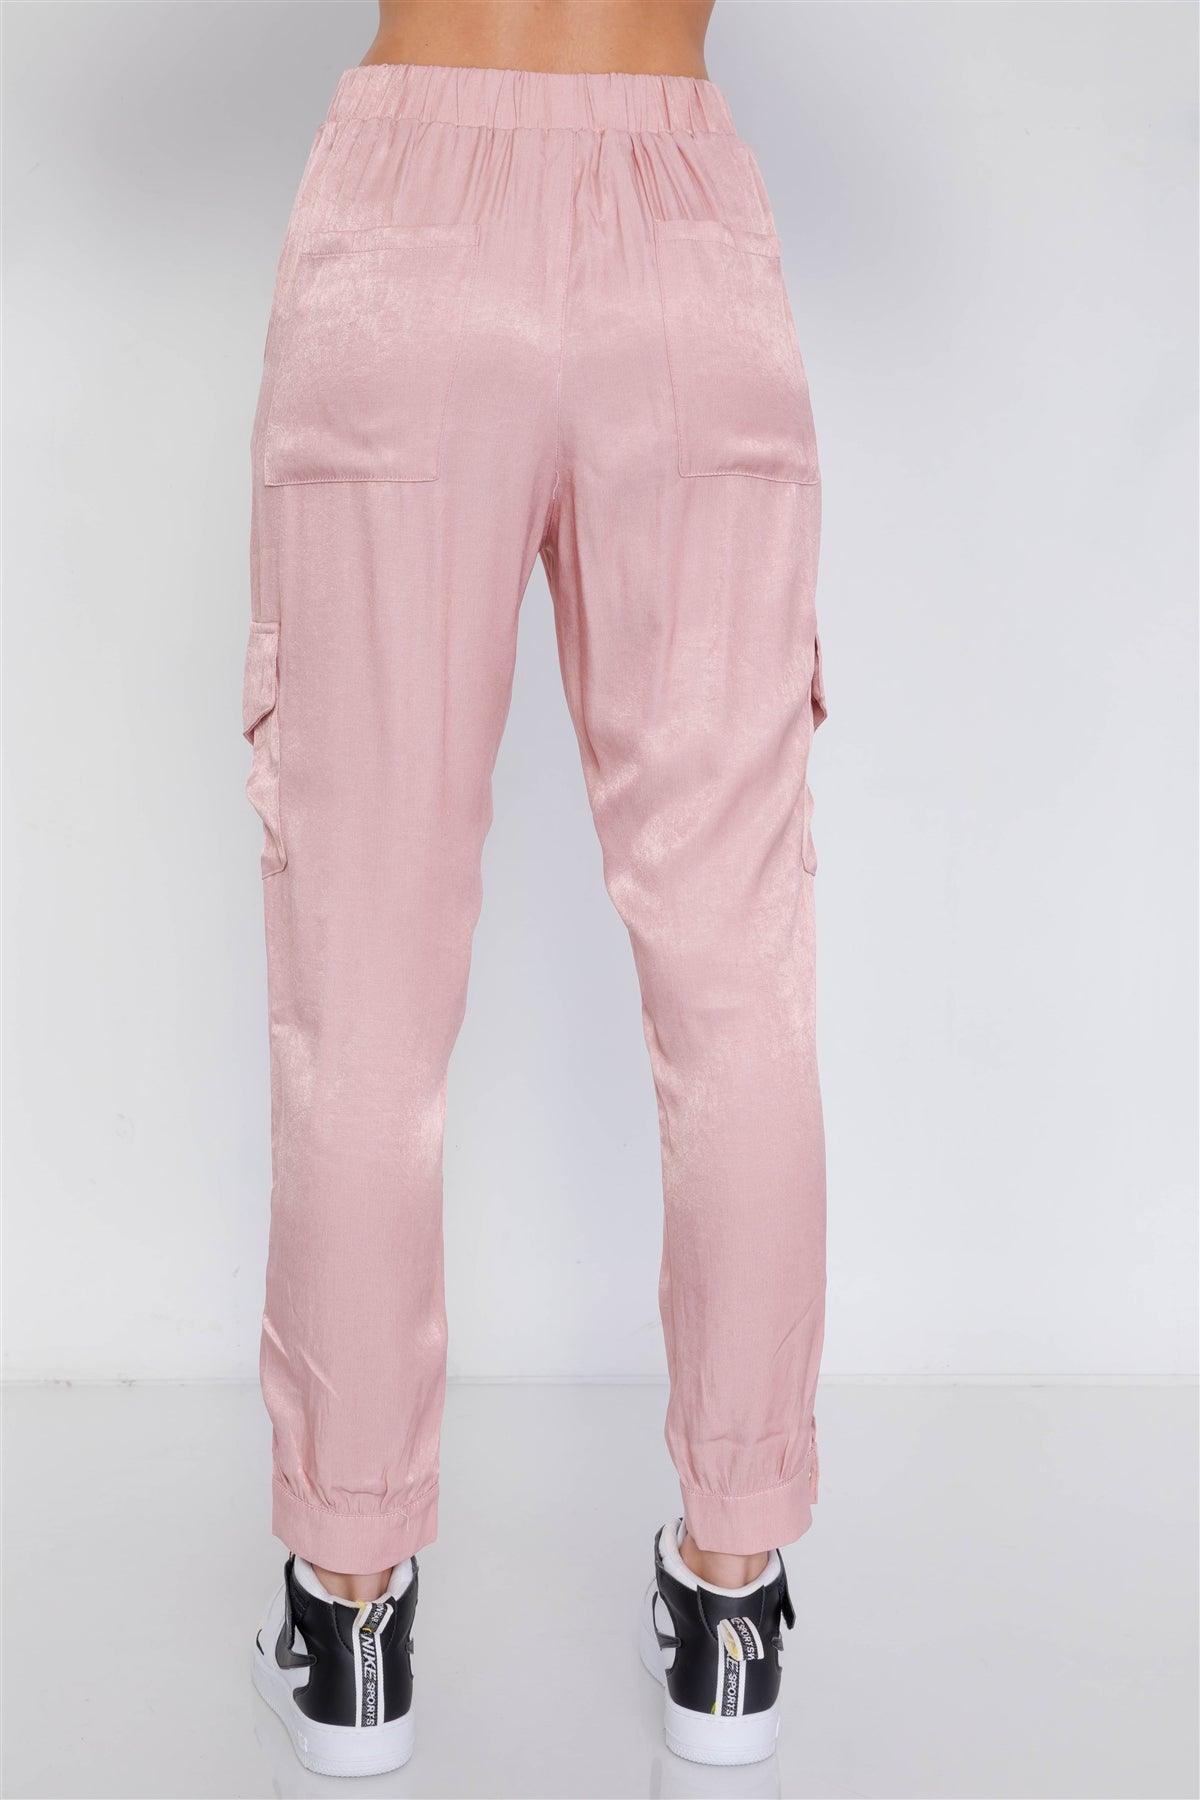 Mauve Satin Cargo Cinched Ankle Relaxed Fit Jogger /3-2-1